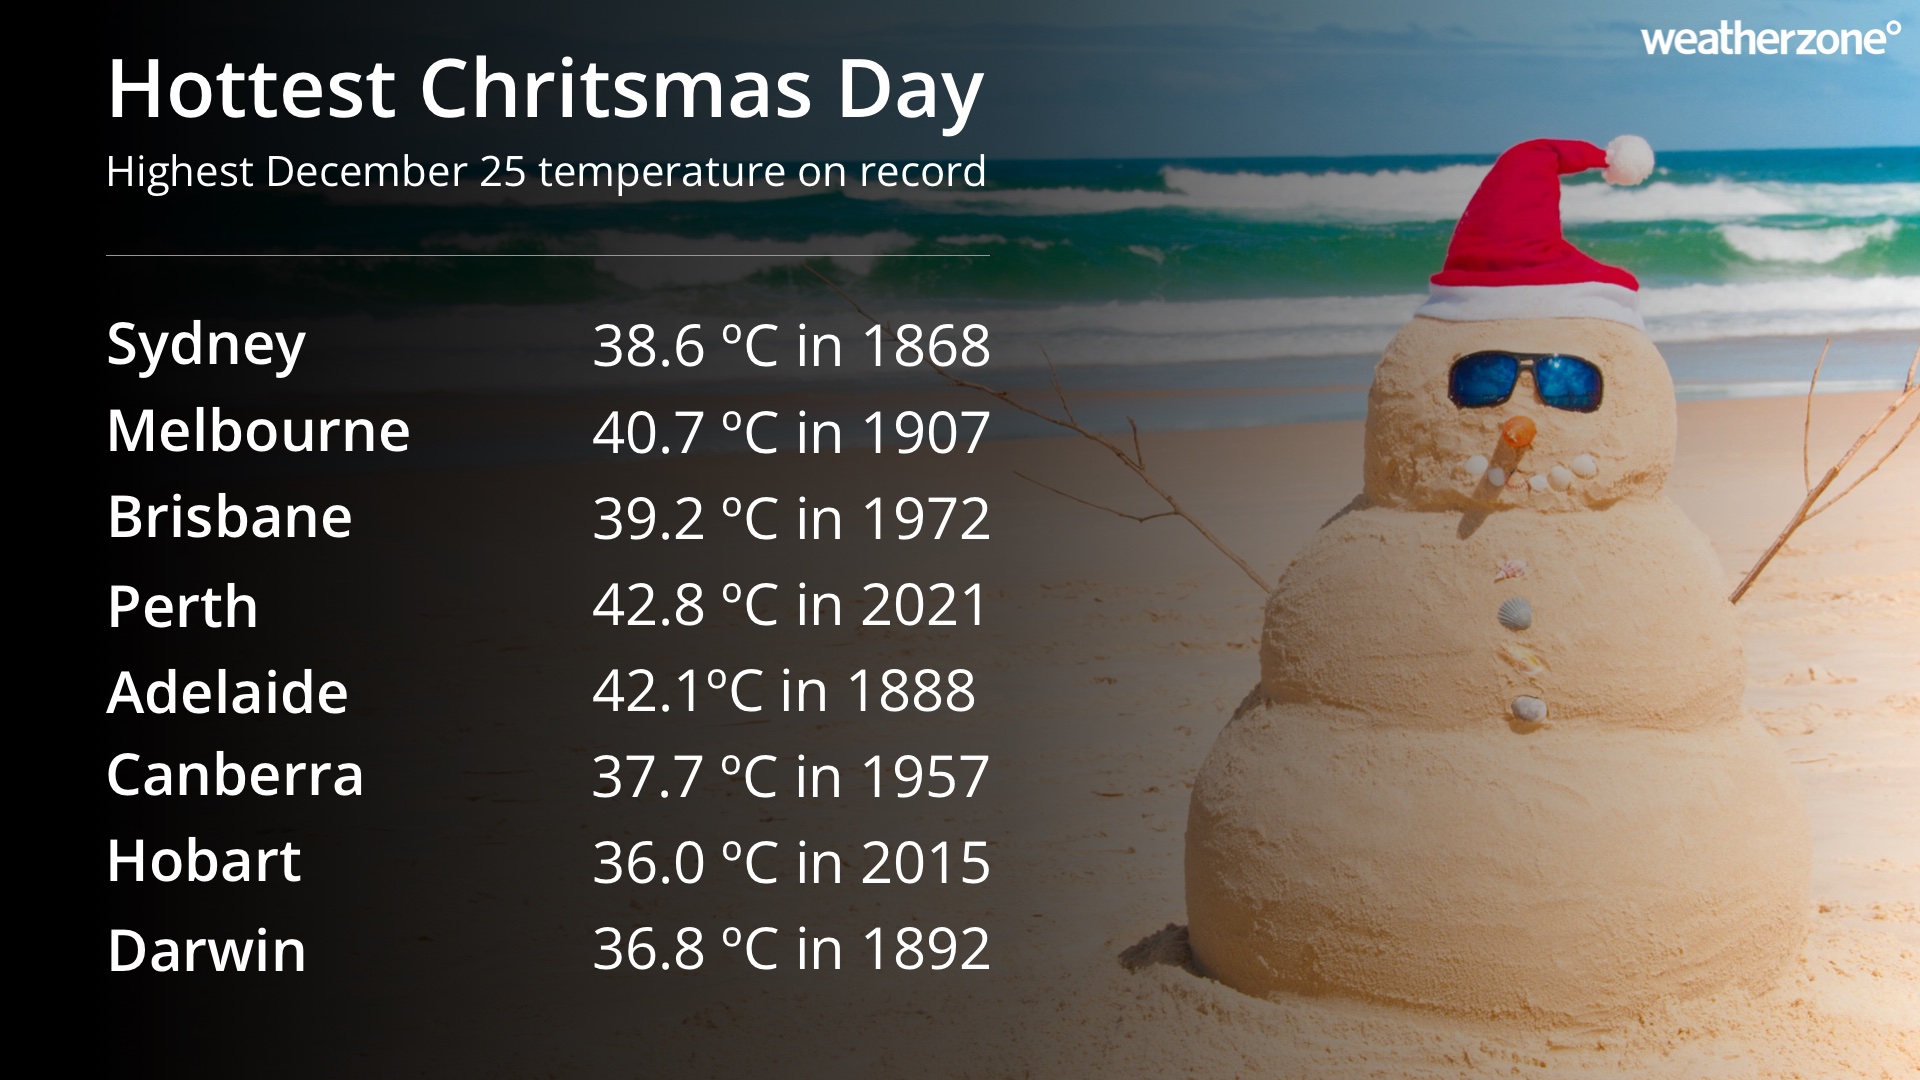 When was Australia's hottest Christmas Day?